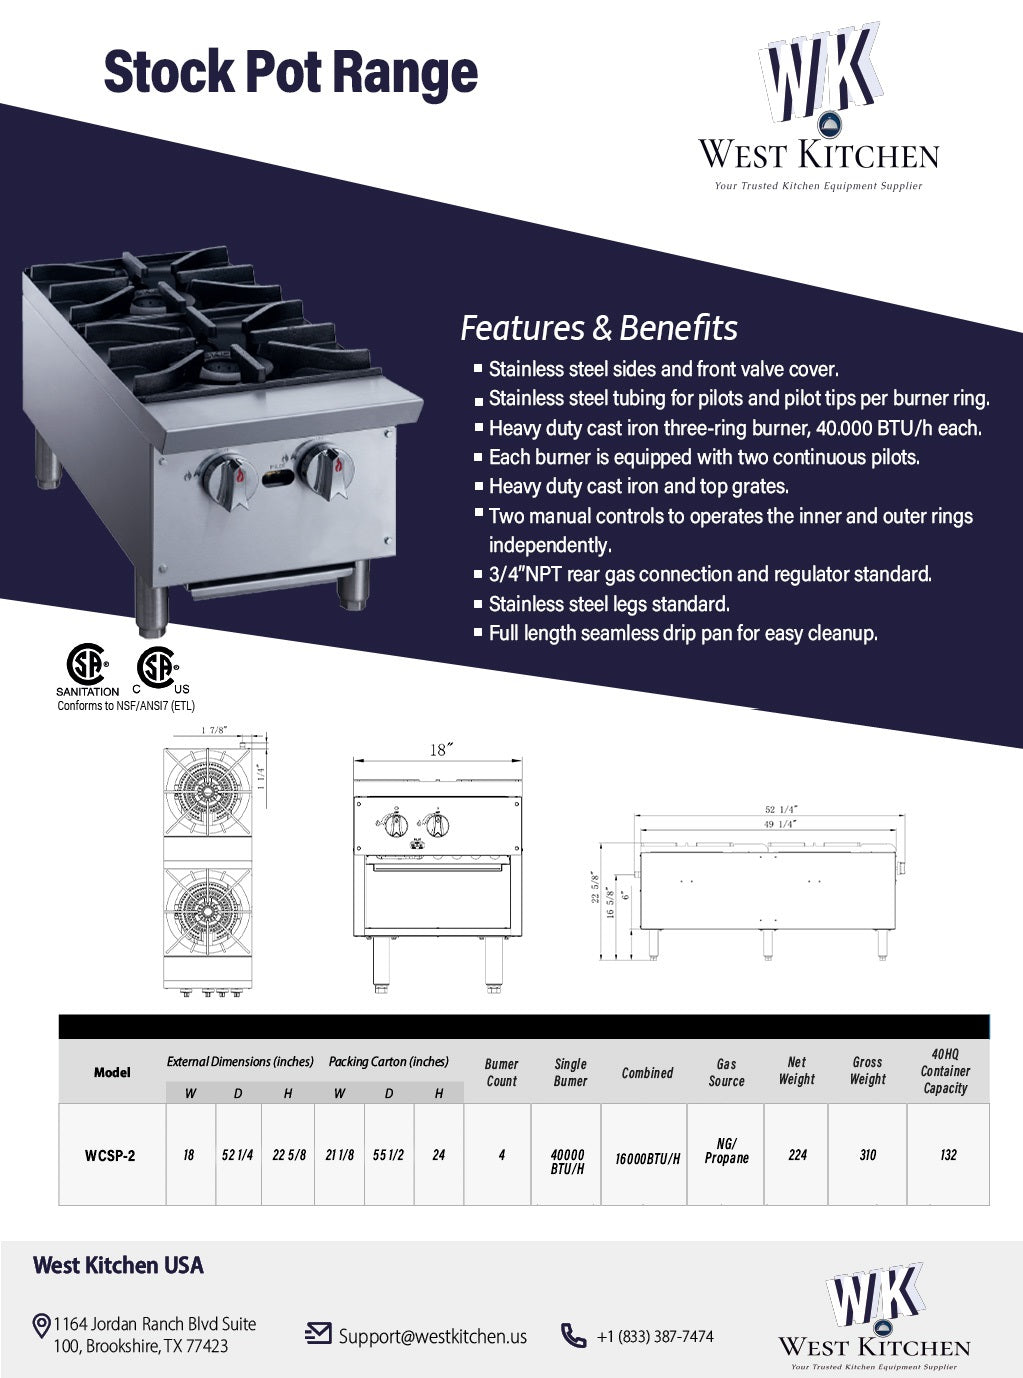 a brochure showing the features and benefits of a gas range